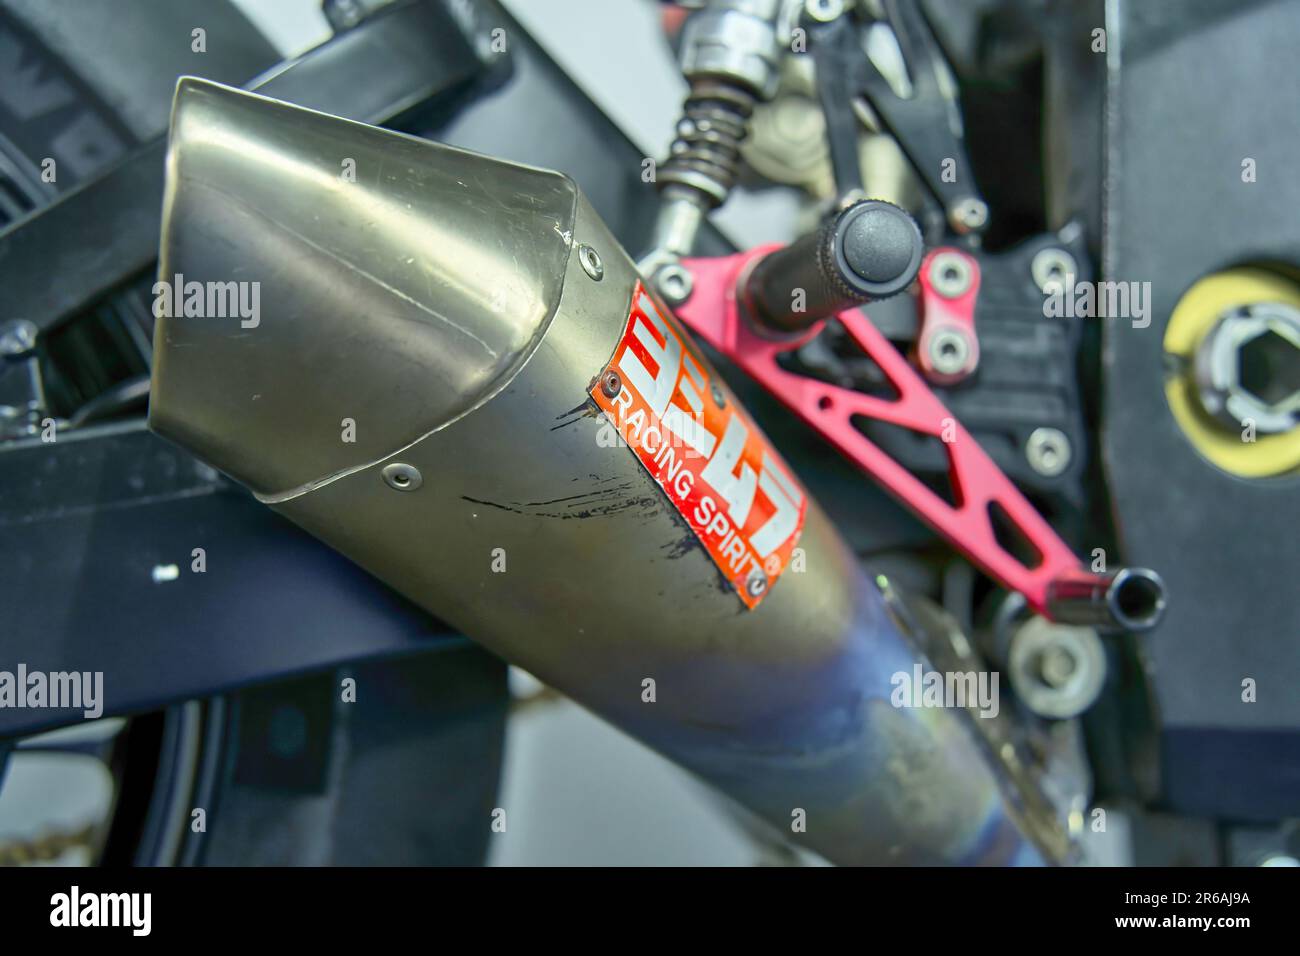 Gifhorn, Germany, March 31, 2023: Yoshimura Suzuki GSX-R 1000, detailed view of the exhaust pipe with kanji characters, Gifhorn Bell Palace Stock Photo